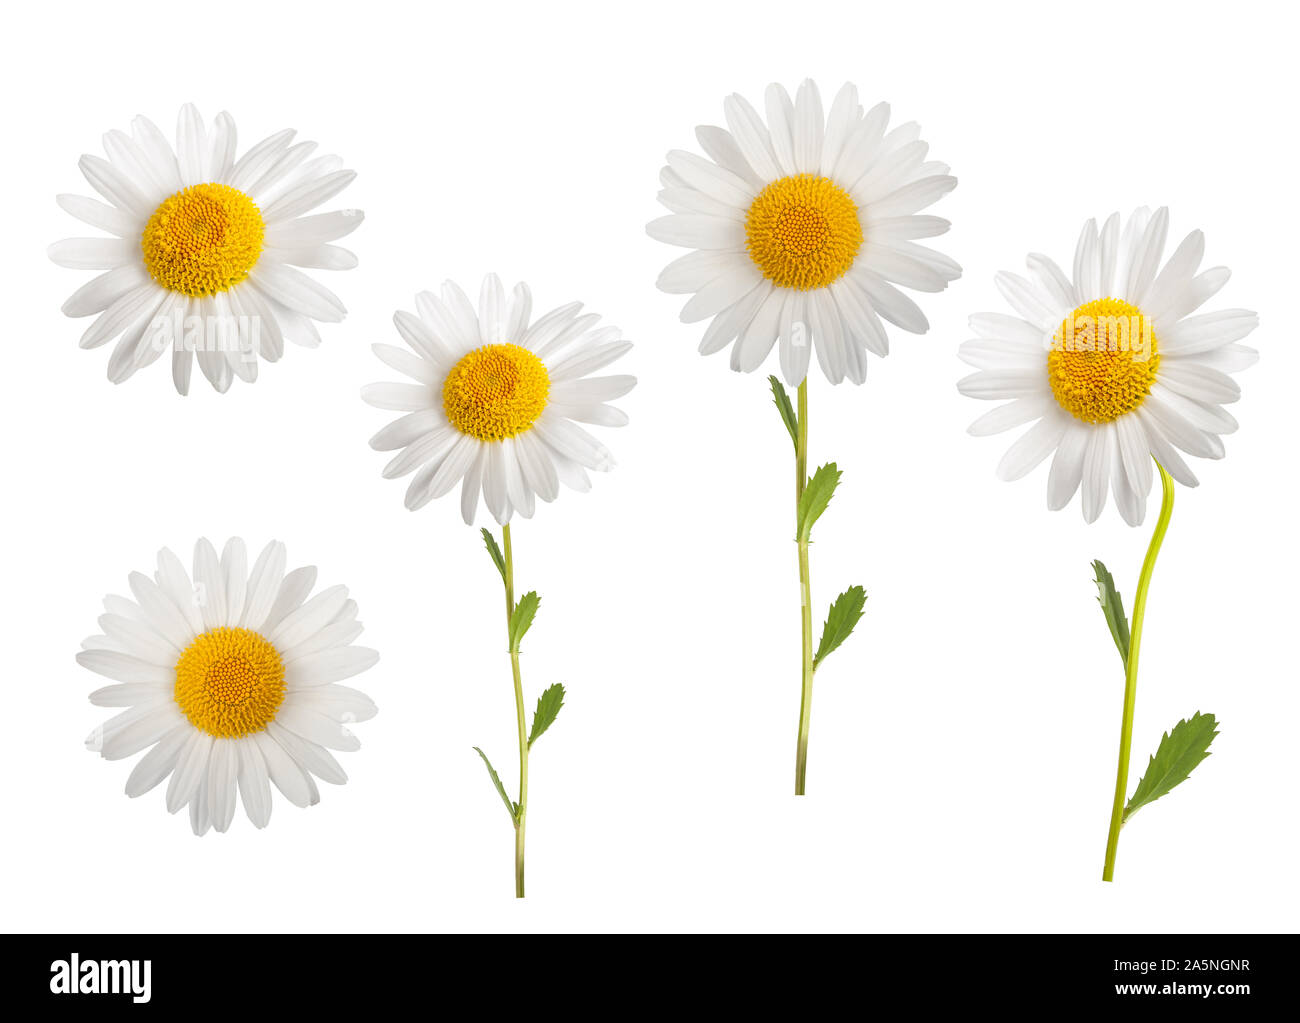 Daisies group isolated on white background Stock Photo